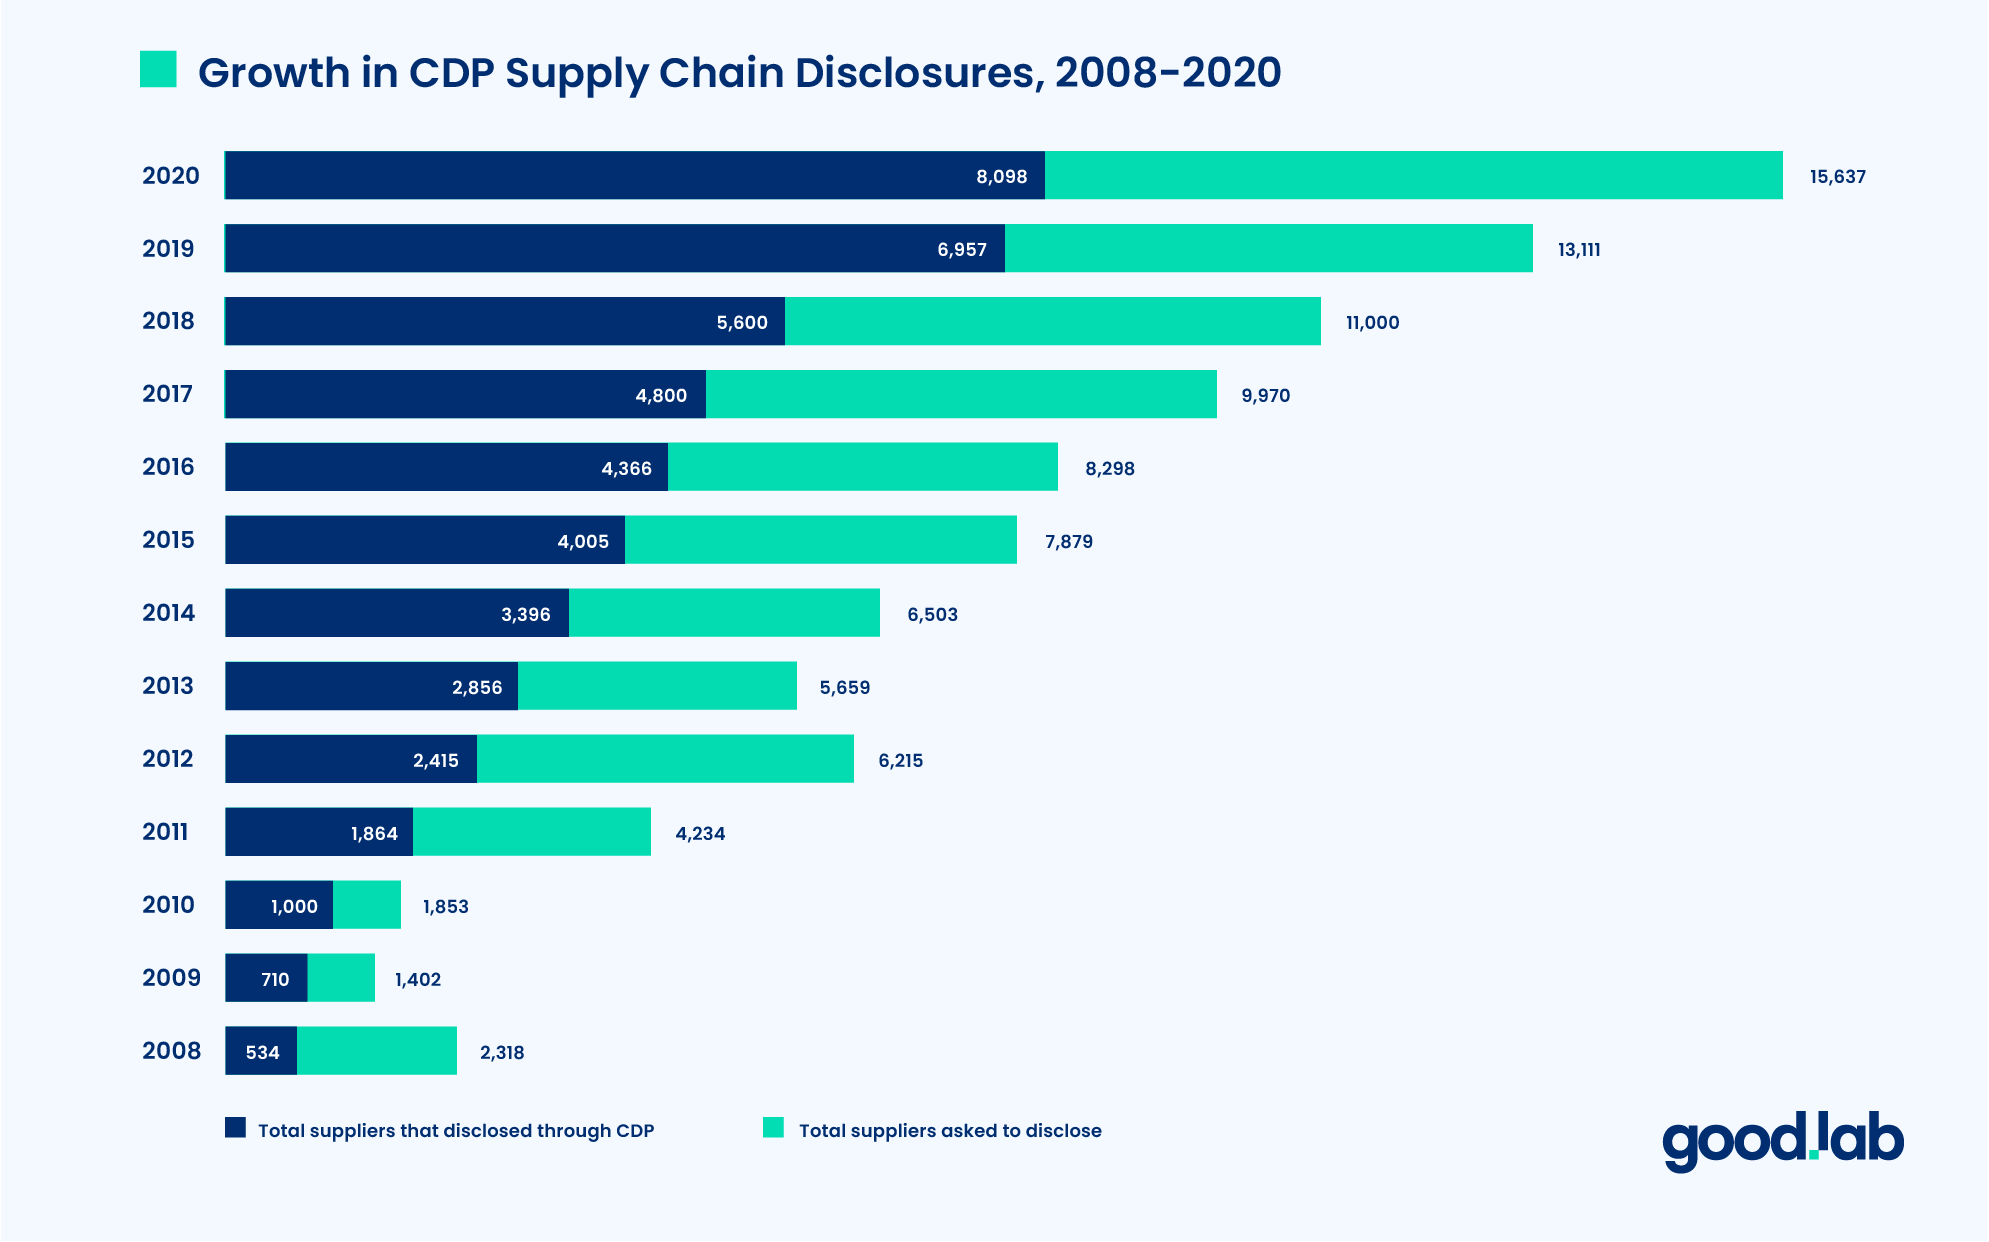 Growth in CDP Supply chain